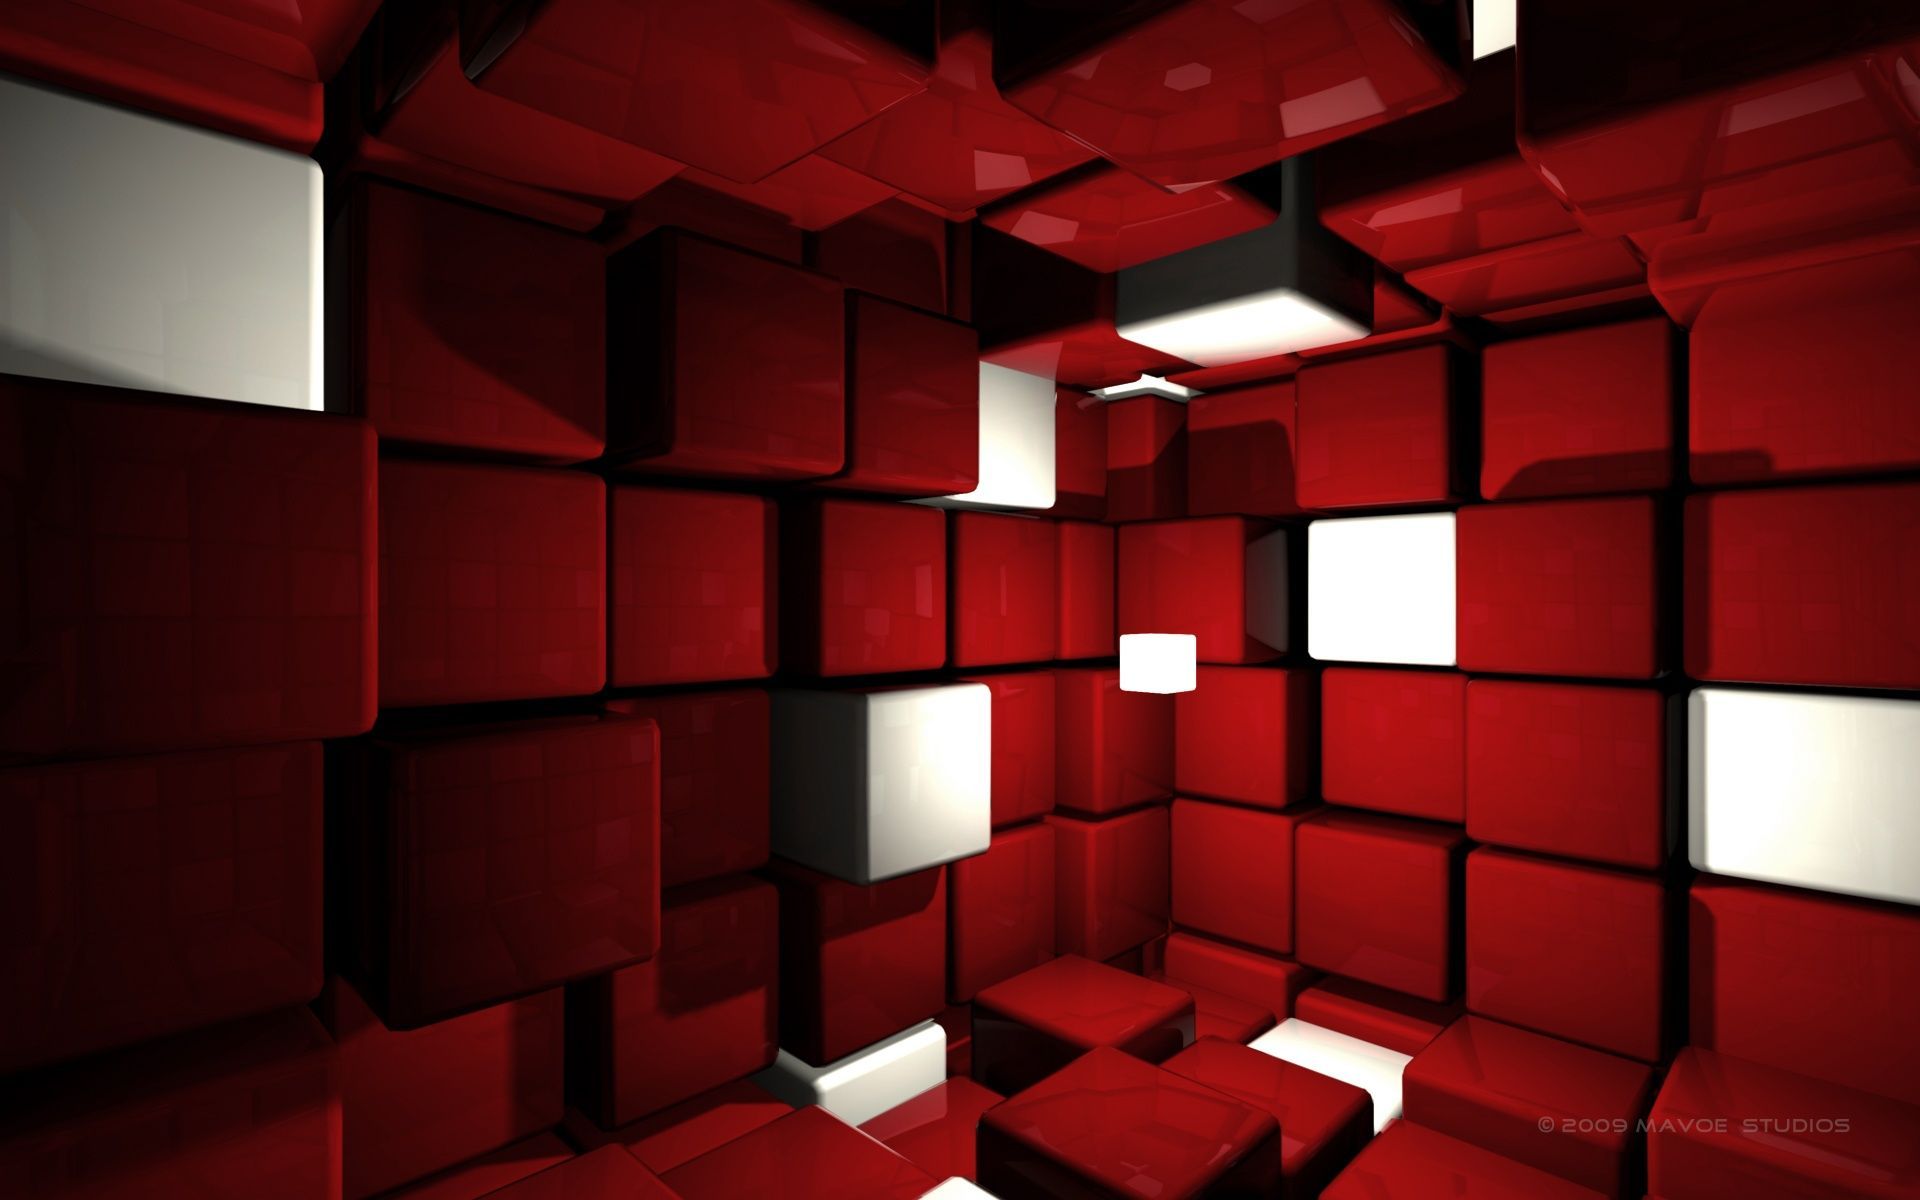 Room with Red Cubes Photo and Desktop Wallpaper